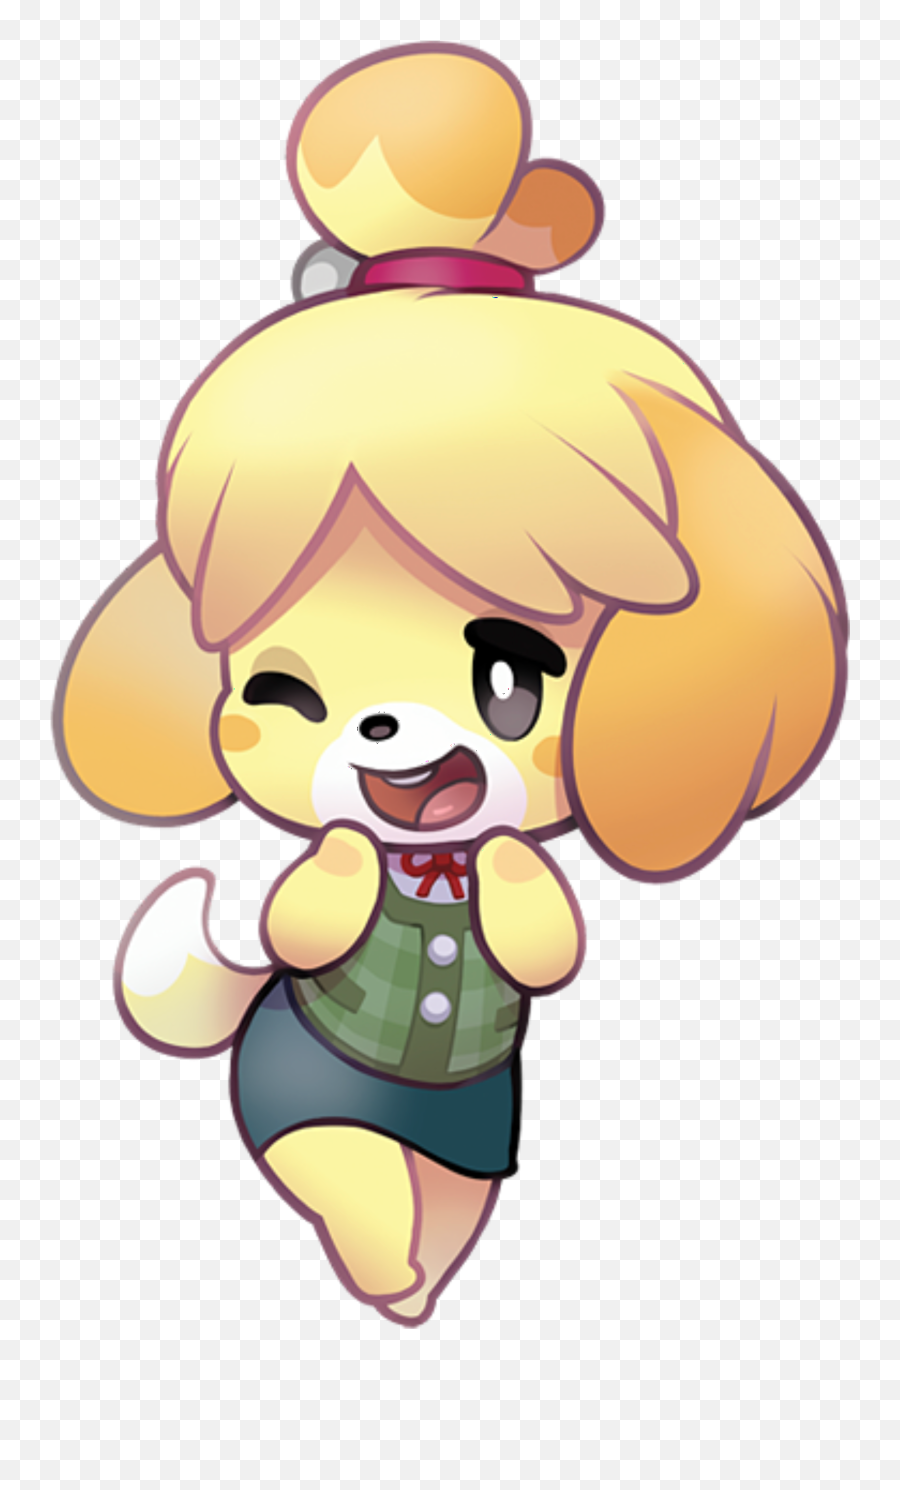 Cute Isabelle Animal Crossing Clipart - Cute Animal Crossing Isabelle Emoji,Animal Crossing Emoji